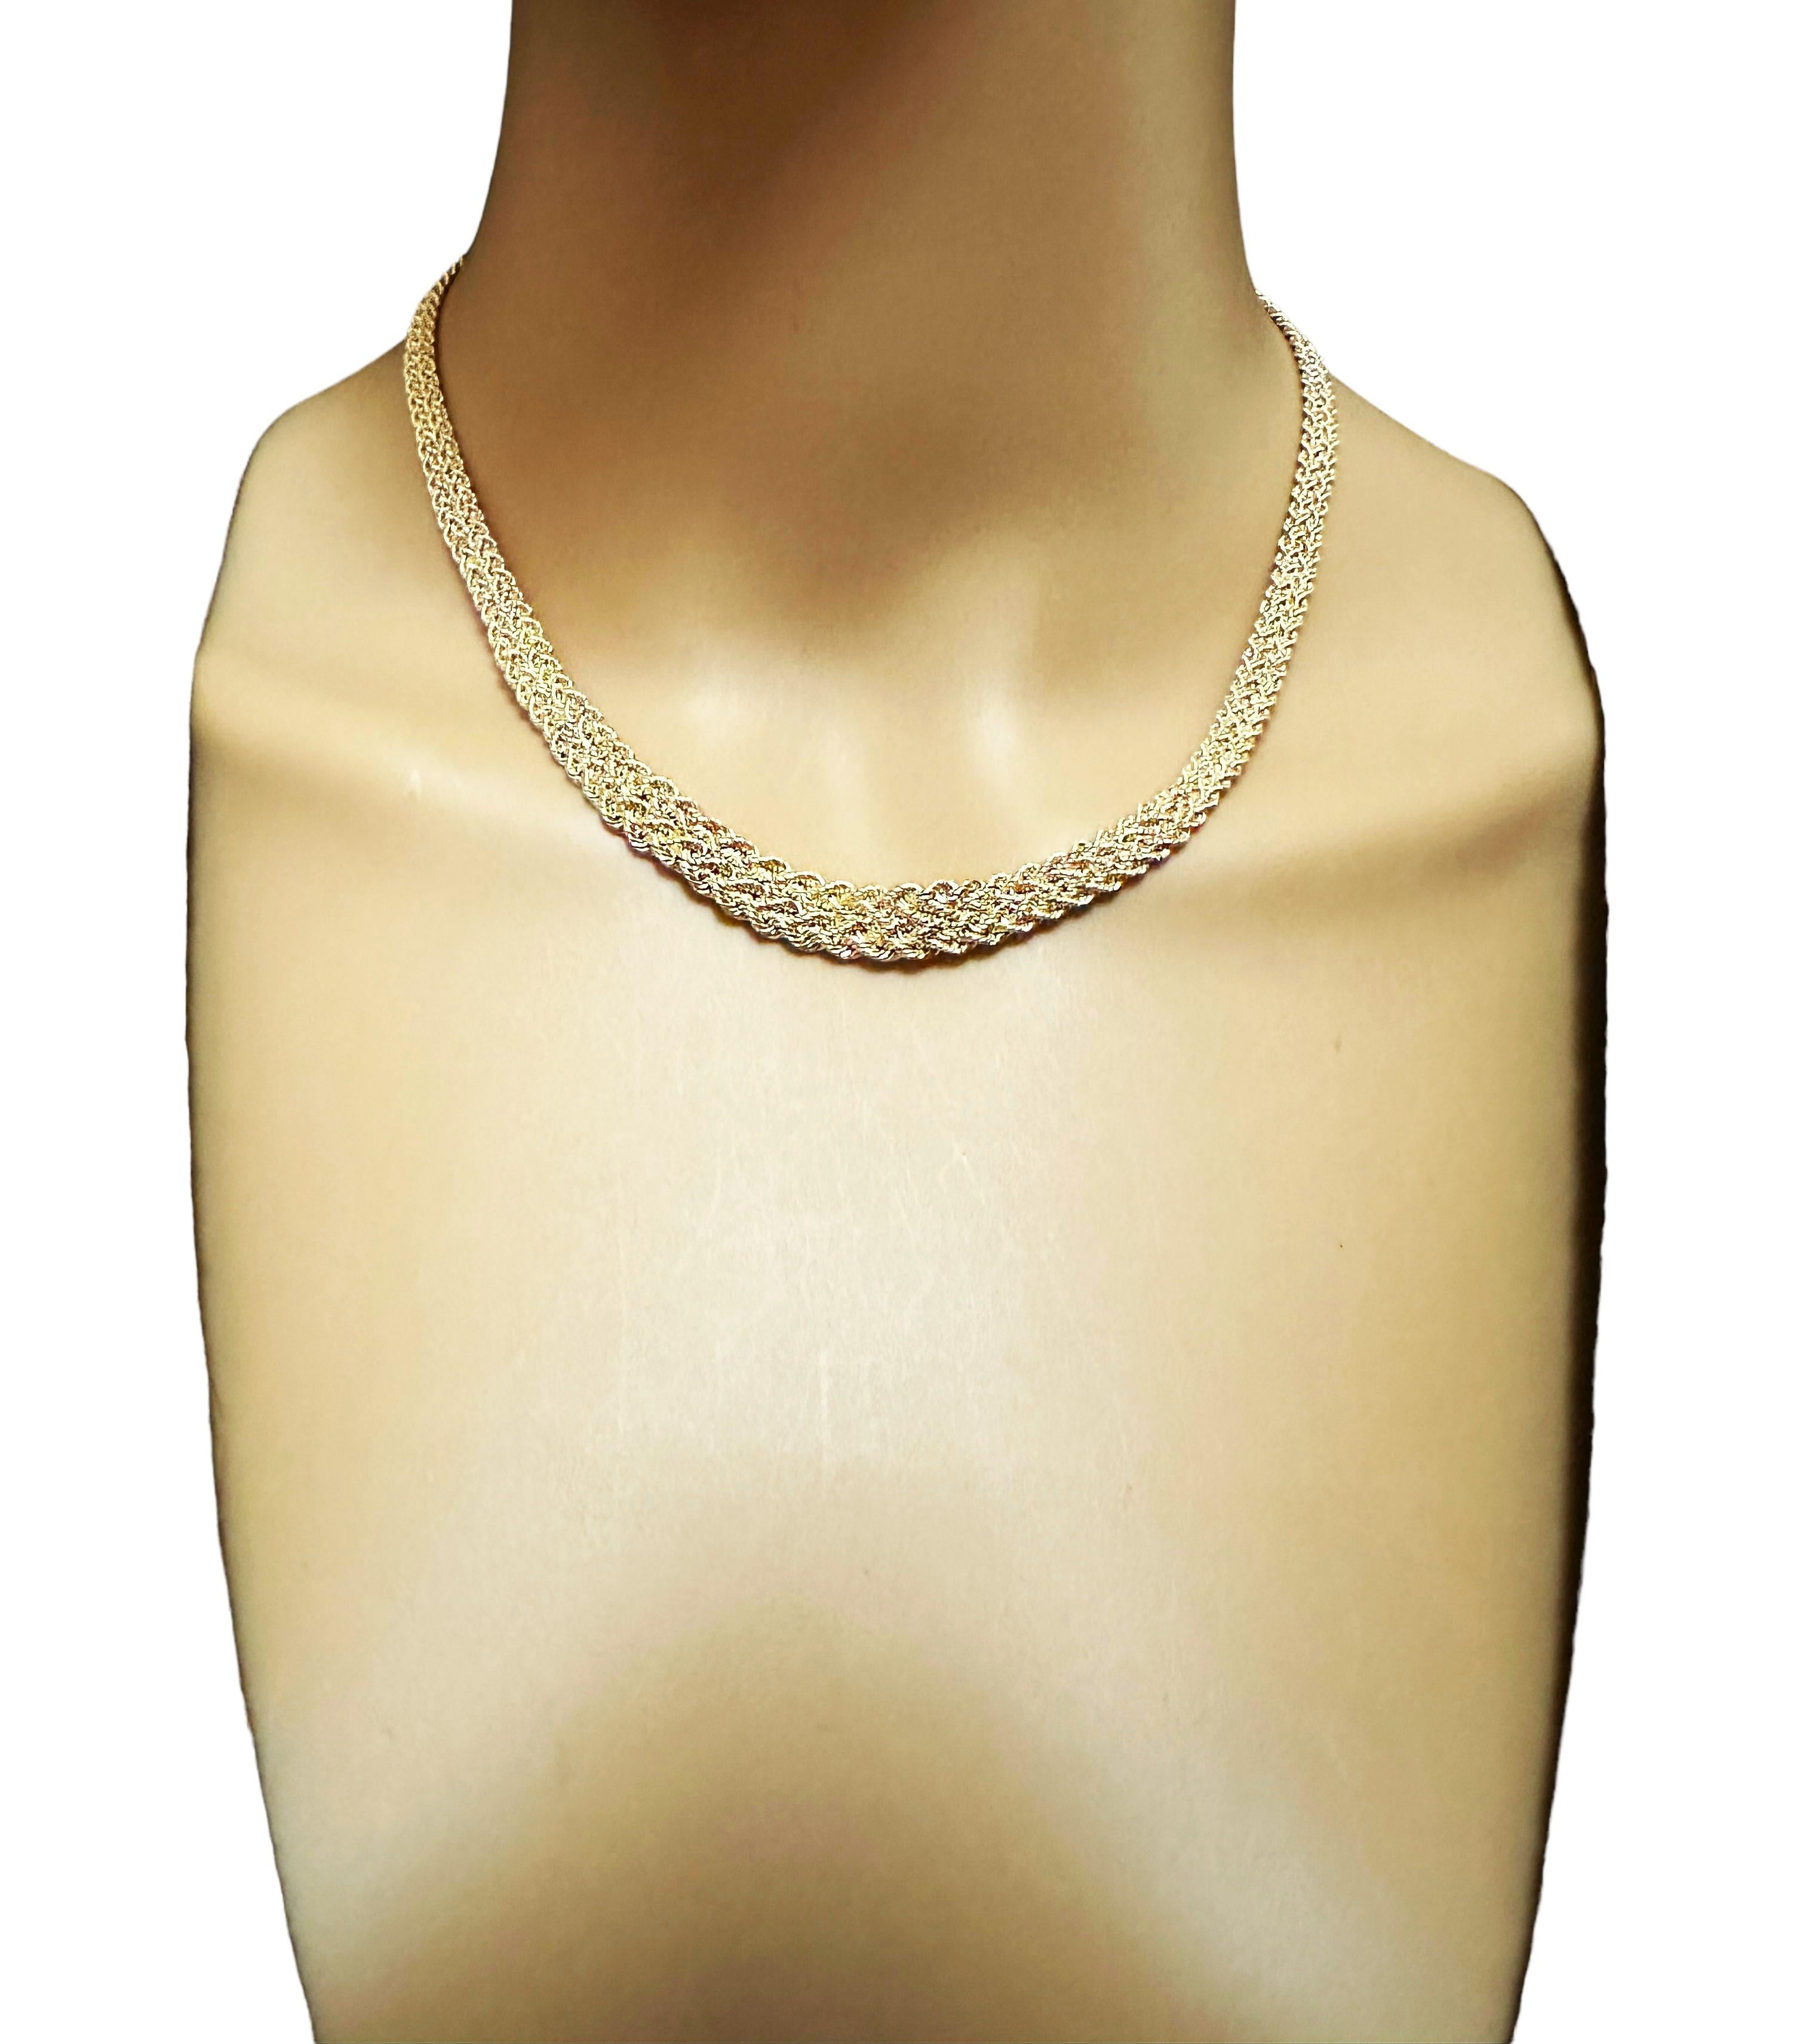 14k Yellow Gold Graduated Wove Aurafin Italian Necklace 16 Inches In Excellent Condition For Sale In Eagan, MN